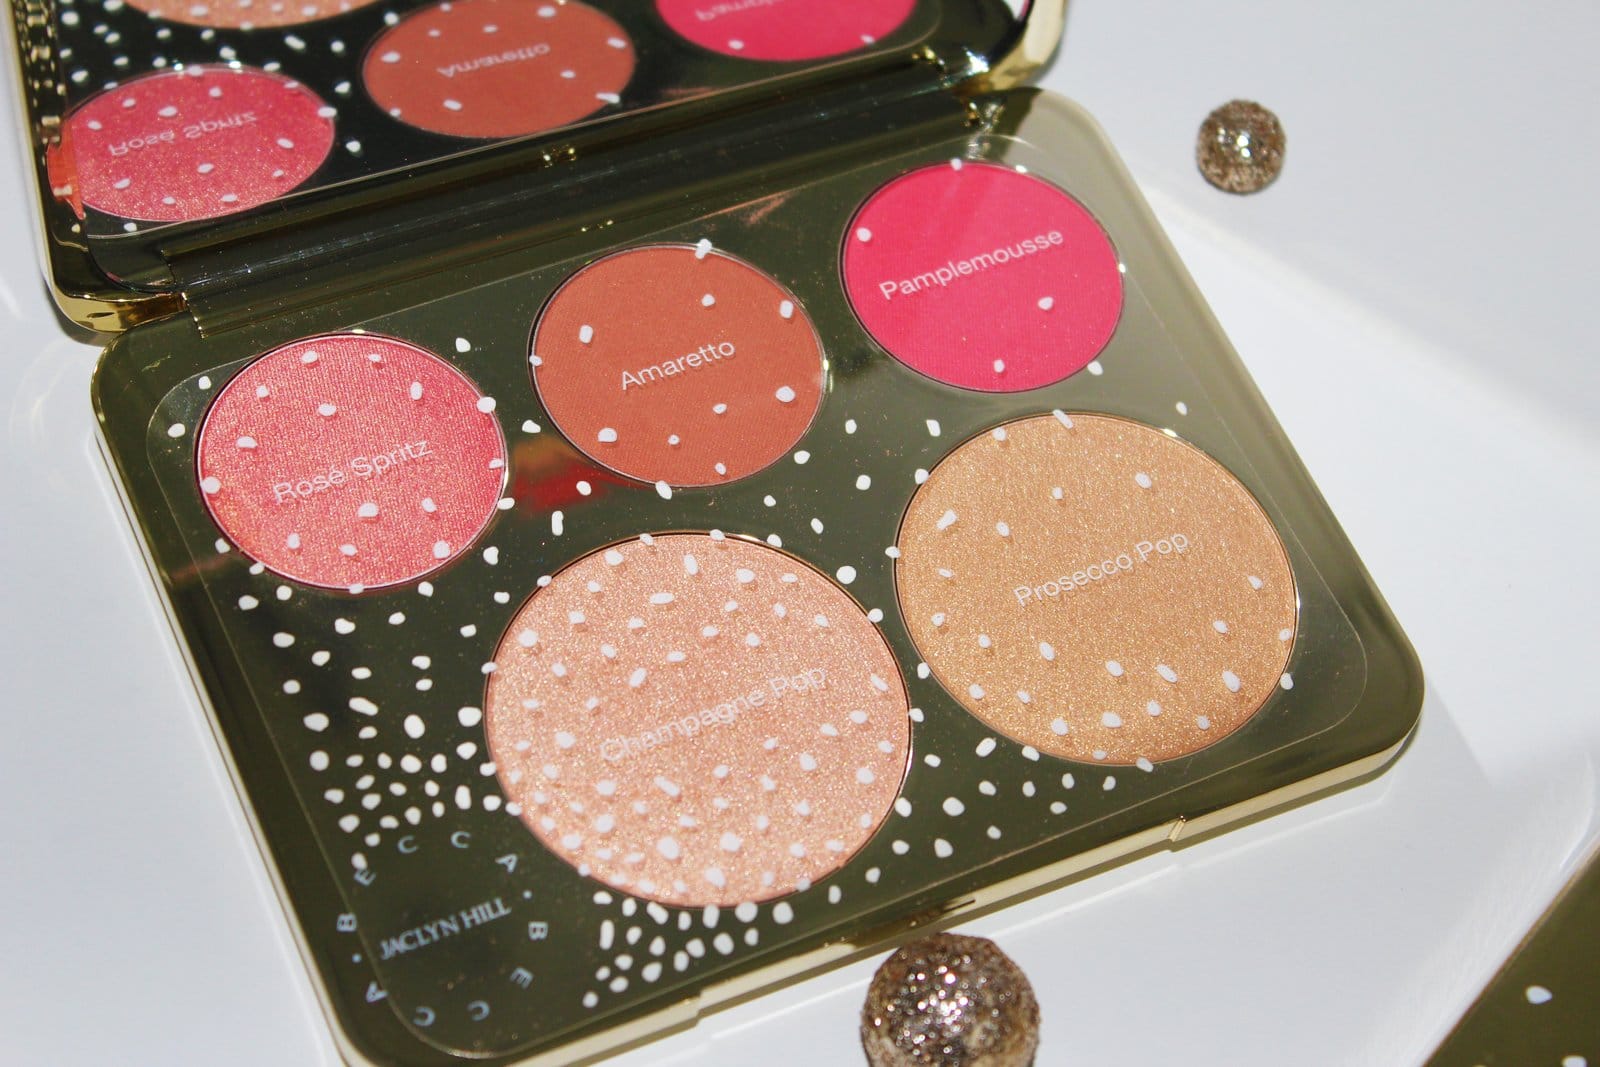 Becca Cosmetics x Jaclyn Hill Champagne Collection Face palette